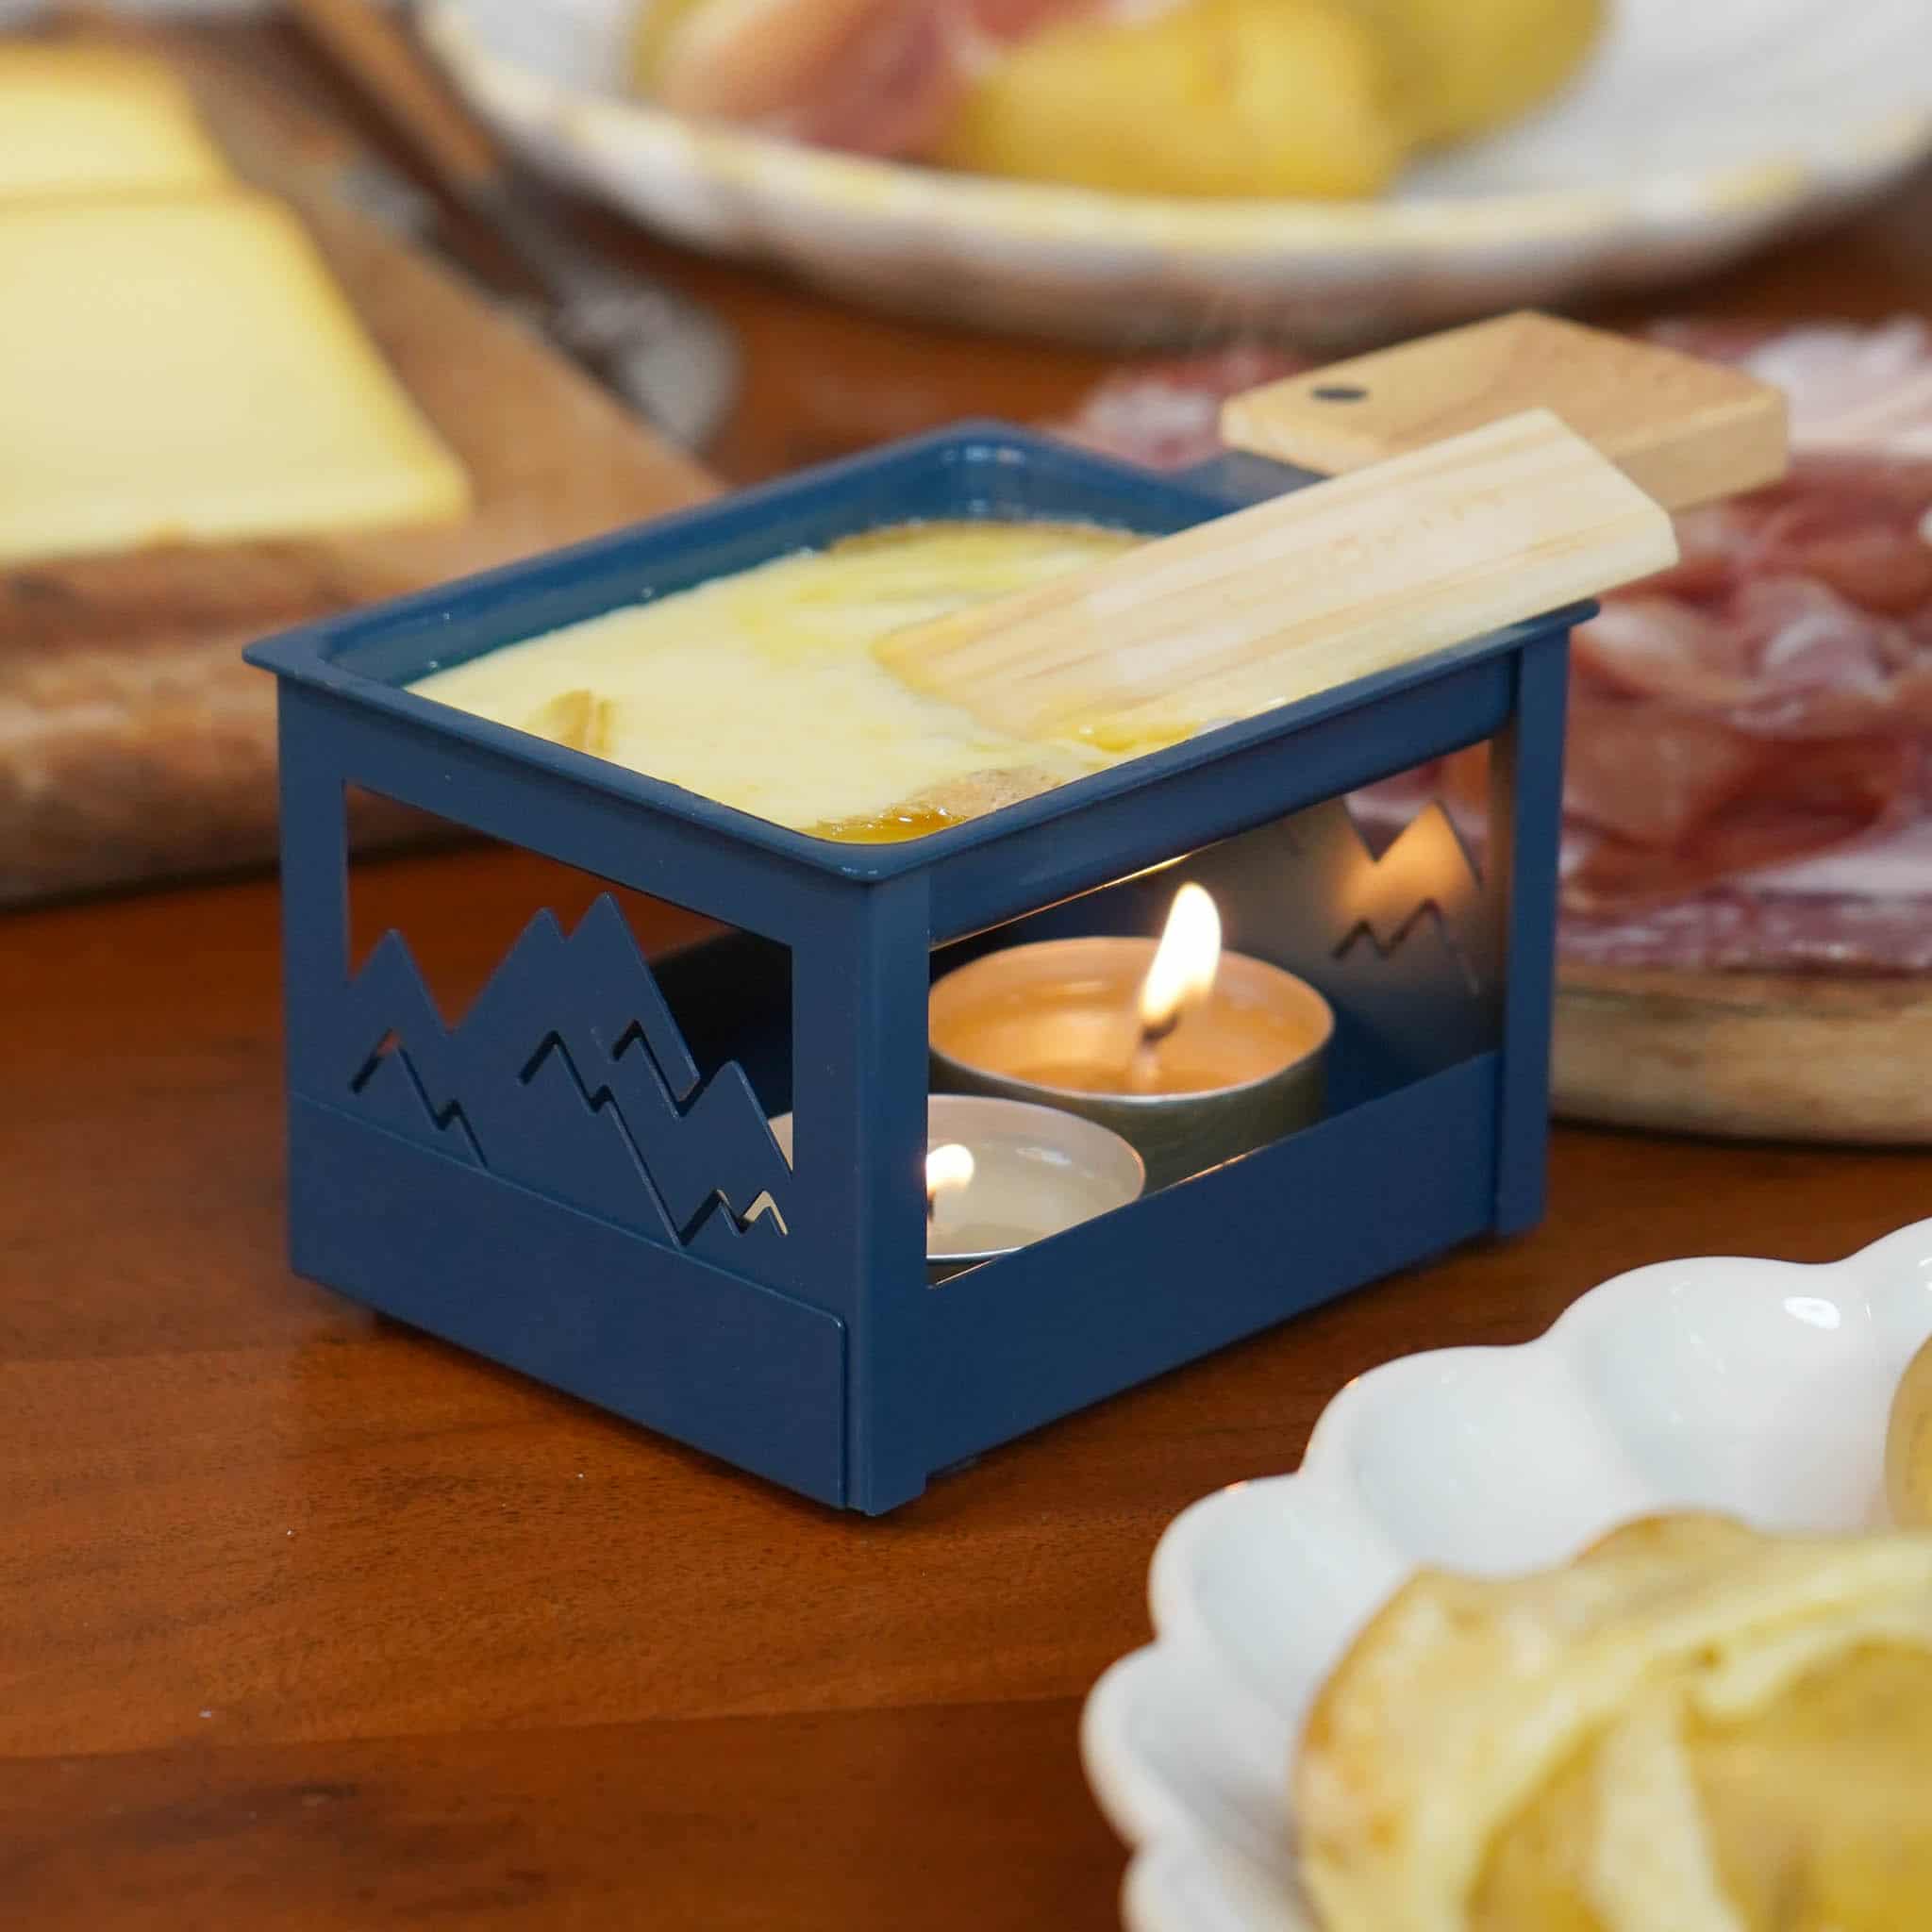 Cookut Foldable Raclette with Tealight, Blue